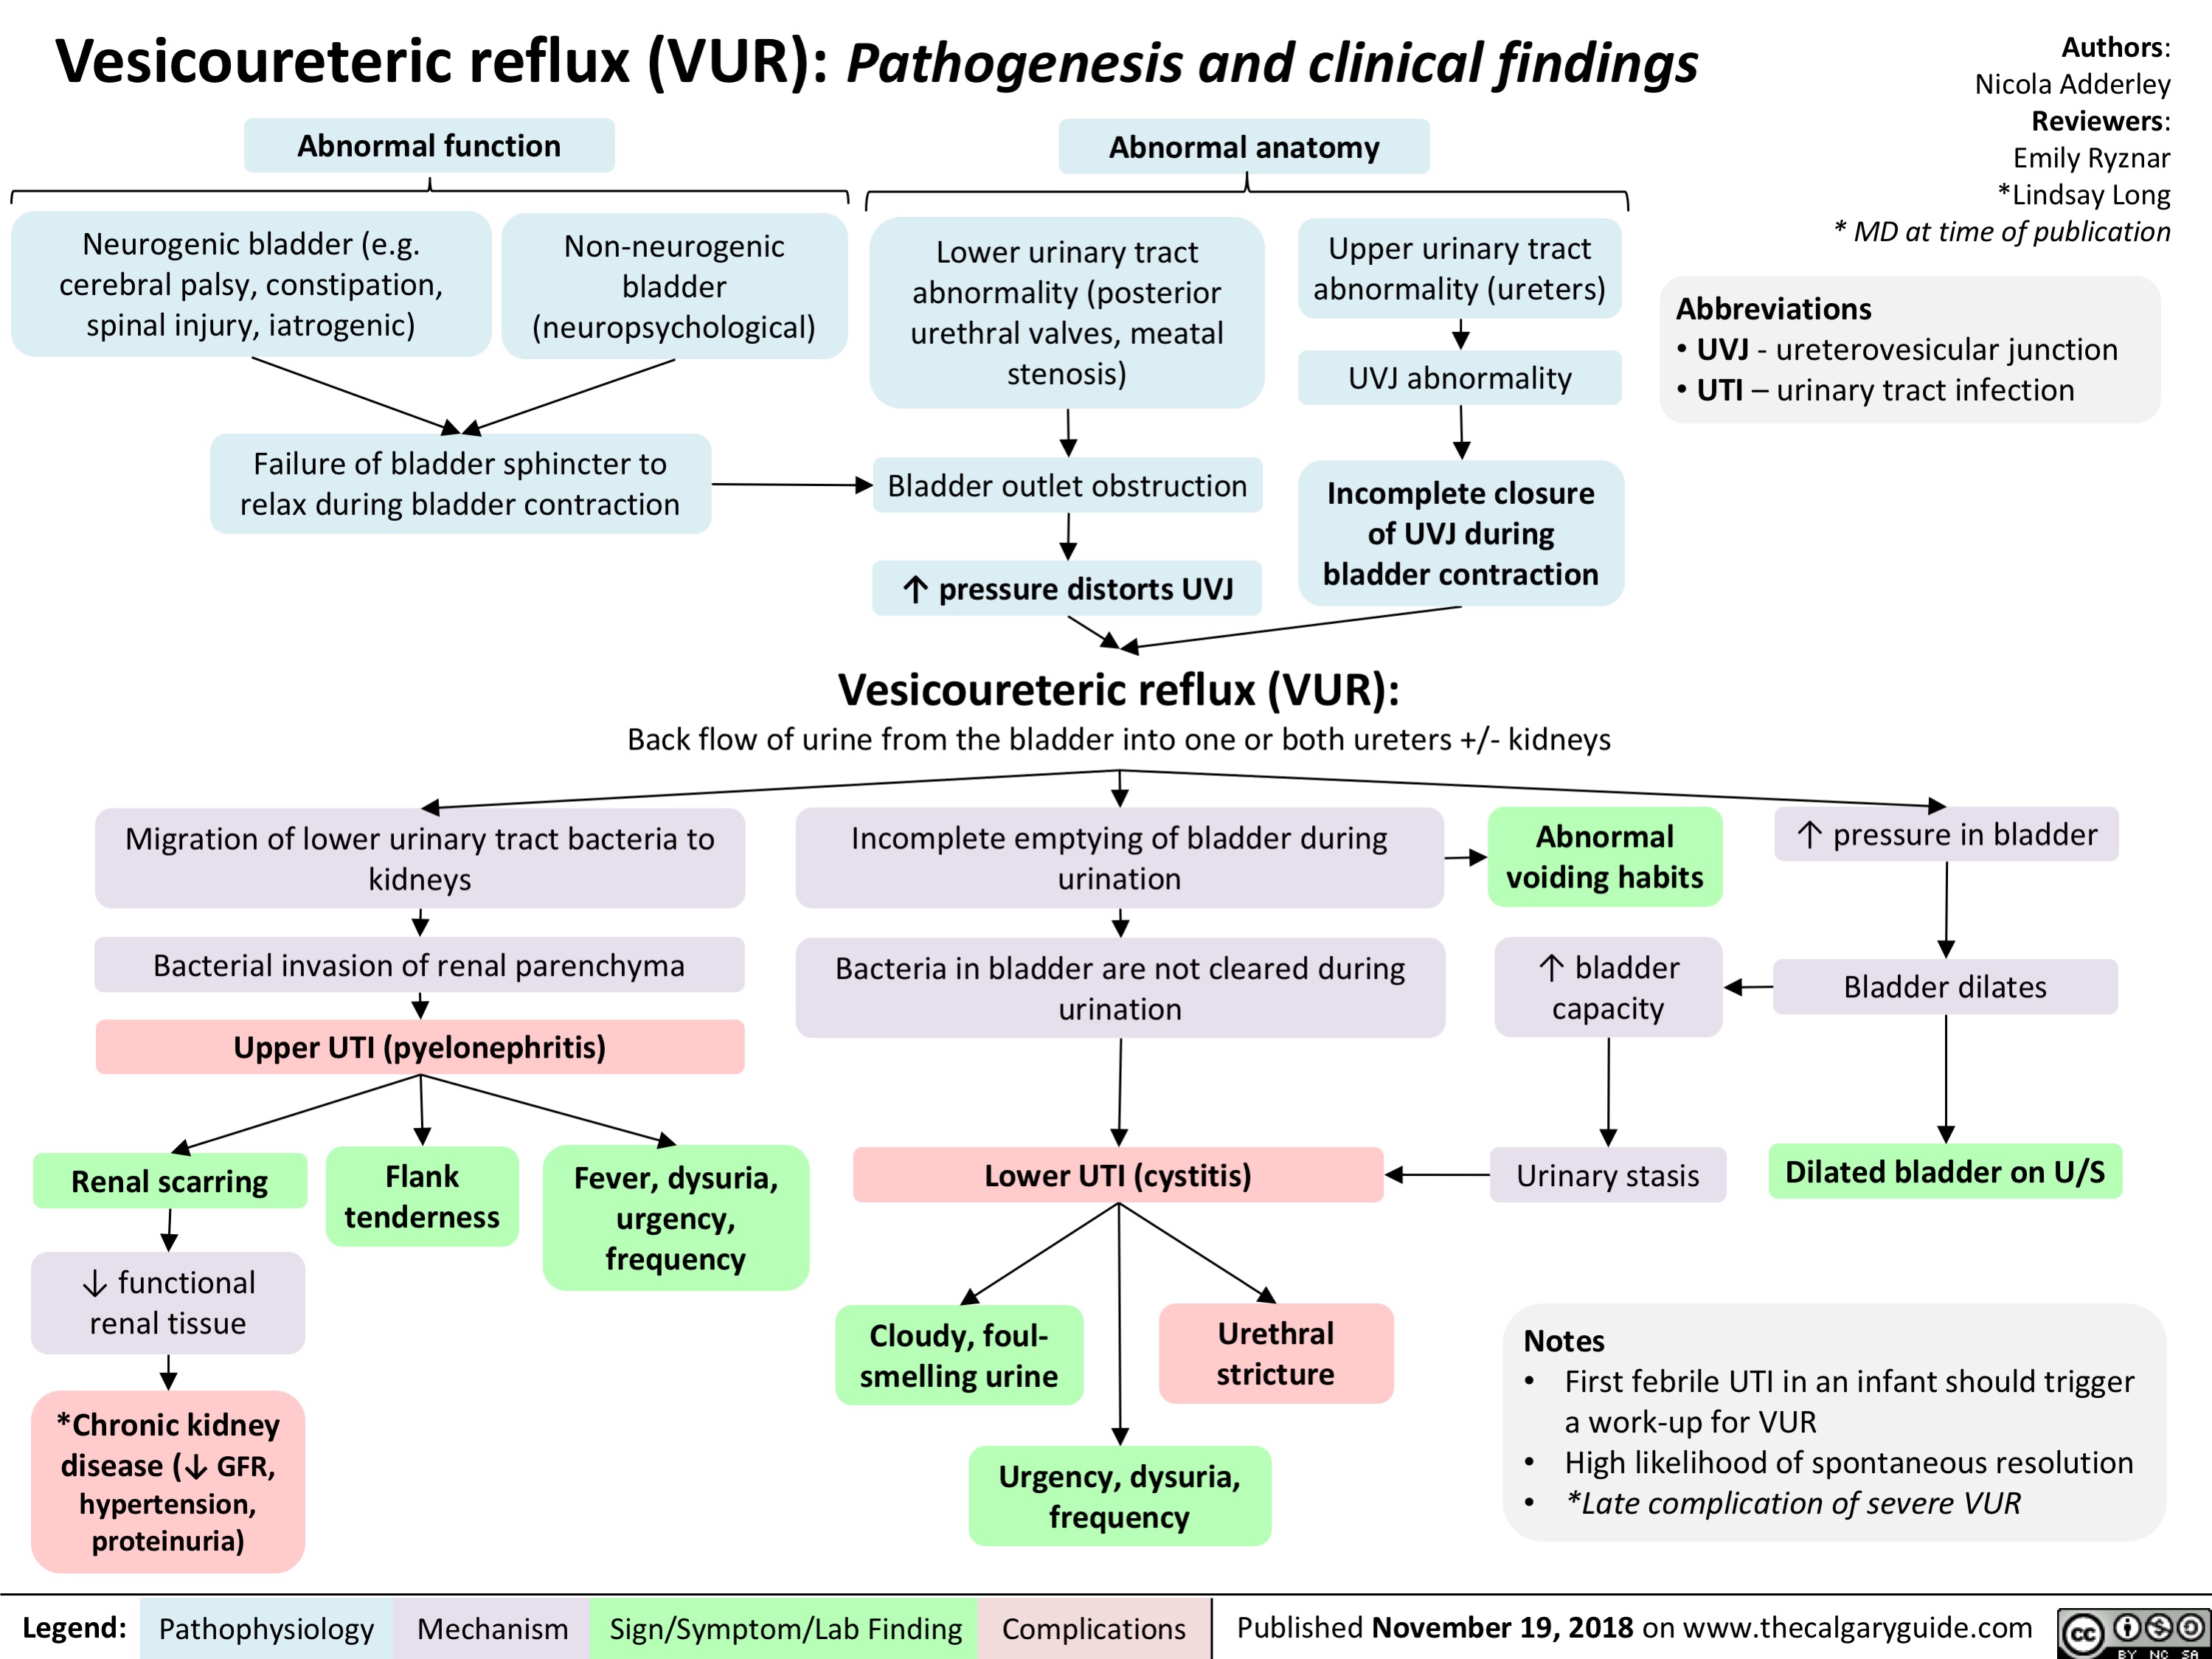 Vesicoureteric reflux (VUR): Pathogenesis and clinical findings
Authors: Nicola Adderley Reviewers: Emily Ryznar *Lindsay Long * MD at time of publication
  Abnormal function
Abnormal anatomy
      Neurogenic bladder (e.g. cerebral palsy, constipation, spinal injury, iatrogenic)
Non-neurogenic bladder (neuropsychological)
Lower urinary tract abnormality (posterior urethral valves, meatal stenosis)
Bladder outlet obstruction
↑ pressure distorts UVJ
Upper urinary tract abnormality (ureters)
UVJ abnormality
Incomplete closure of UVJ during bladder contraction
Abbreviations
• UVJ - ureterovesicular junction • UTI – urinary tract infection
        Failure of bladder sphincter to relax during bladder contraction
        Vesicoureteric reflux (VUR):
Back flow of urine from the bladder into one or both ureters +/- kidneys
      Migration of lower urinary tract bacteria to kidneys
Bacterial invasion of renal parenchyma
Upper UTI (pyelonephritis)
Incomplete emptying of bladder during     Abnormal
↑ pressure in bladder
Bladder dilates
Dilated bladder on U/S
urination
Bacteria in bladder are not cleared during urination
voiding habits
↑ bladder capacity
                   Renal scarring
↓ functional renal tissue
*Chronic kidney disease (↓ GFR,
hypertension, proteinuria)
Flank tenderness
Fever, dysuria, urgency, frequency
Lower UTI (cystitis)       Urinary stasis
      Cloudy, foul- smelling urine
Urethral stricture
Notes
   Urgency, dysuria, frequency
• First febrile UTI in an infant should trigger a work-up for VUR
• High likelihood of spontaneous resolution • *Late complication of severe VUR
 Legend:
 Pathophysiology
 Mechanism
Sign/Symptom/Lab Finding
  Complications
Published November 19, 2018 on www.thecalgaryguide.com
   